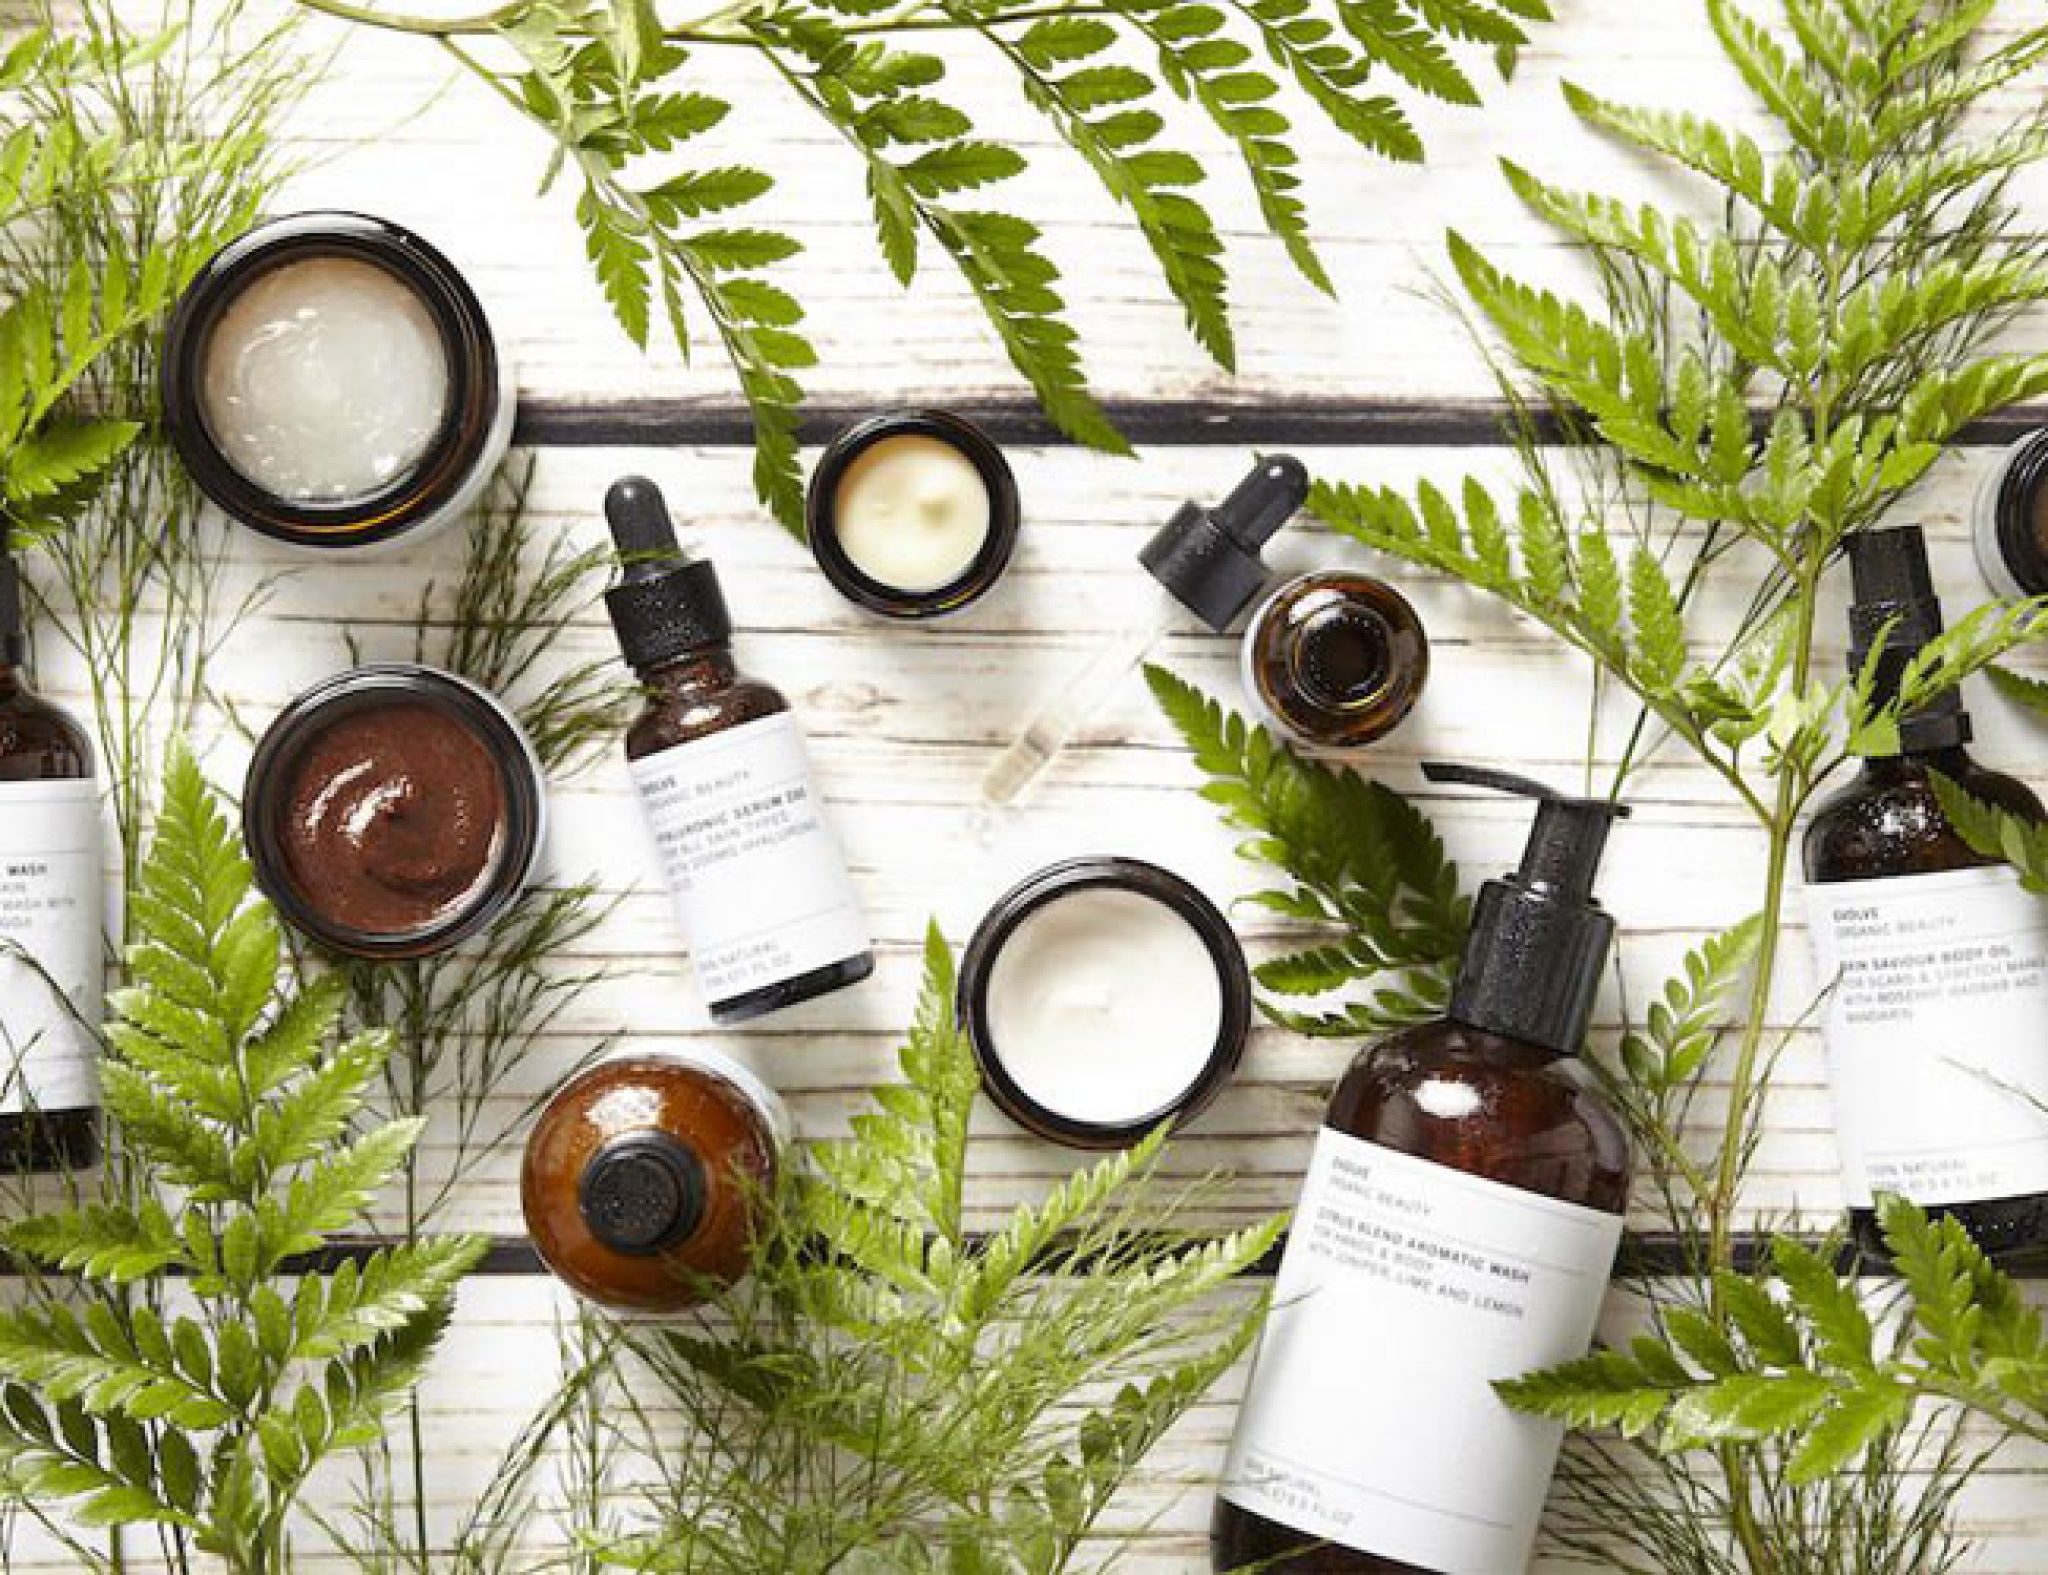 Sale of organic cosmetic products in Israel